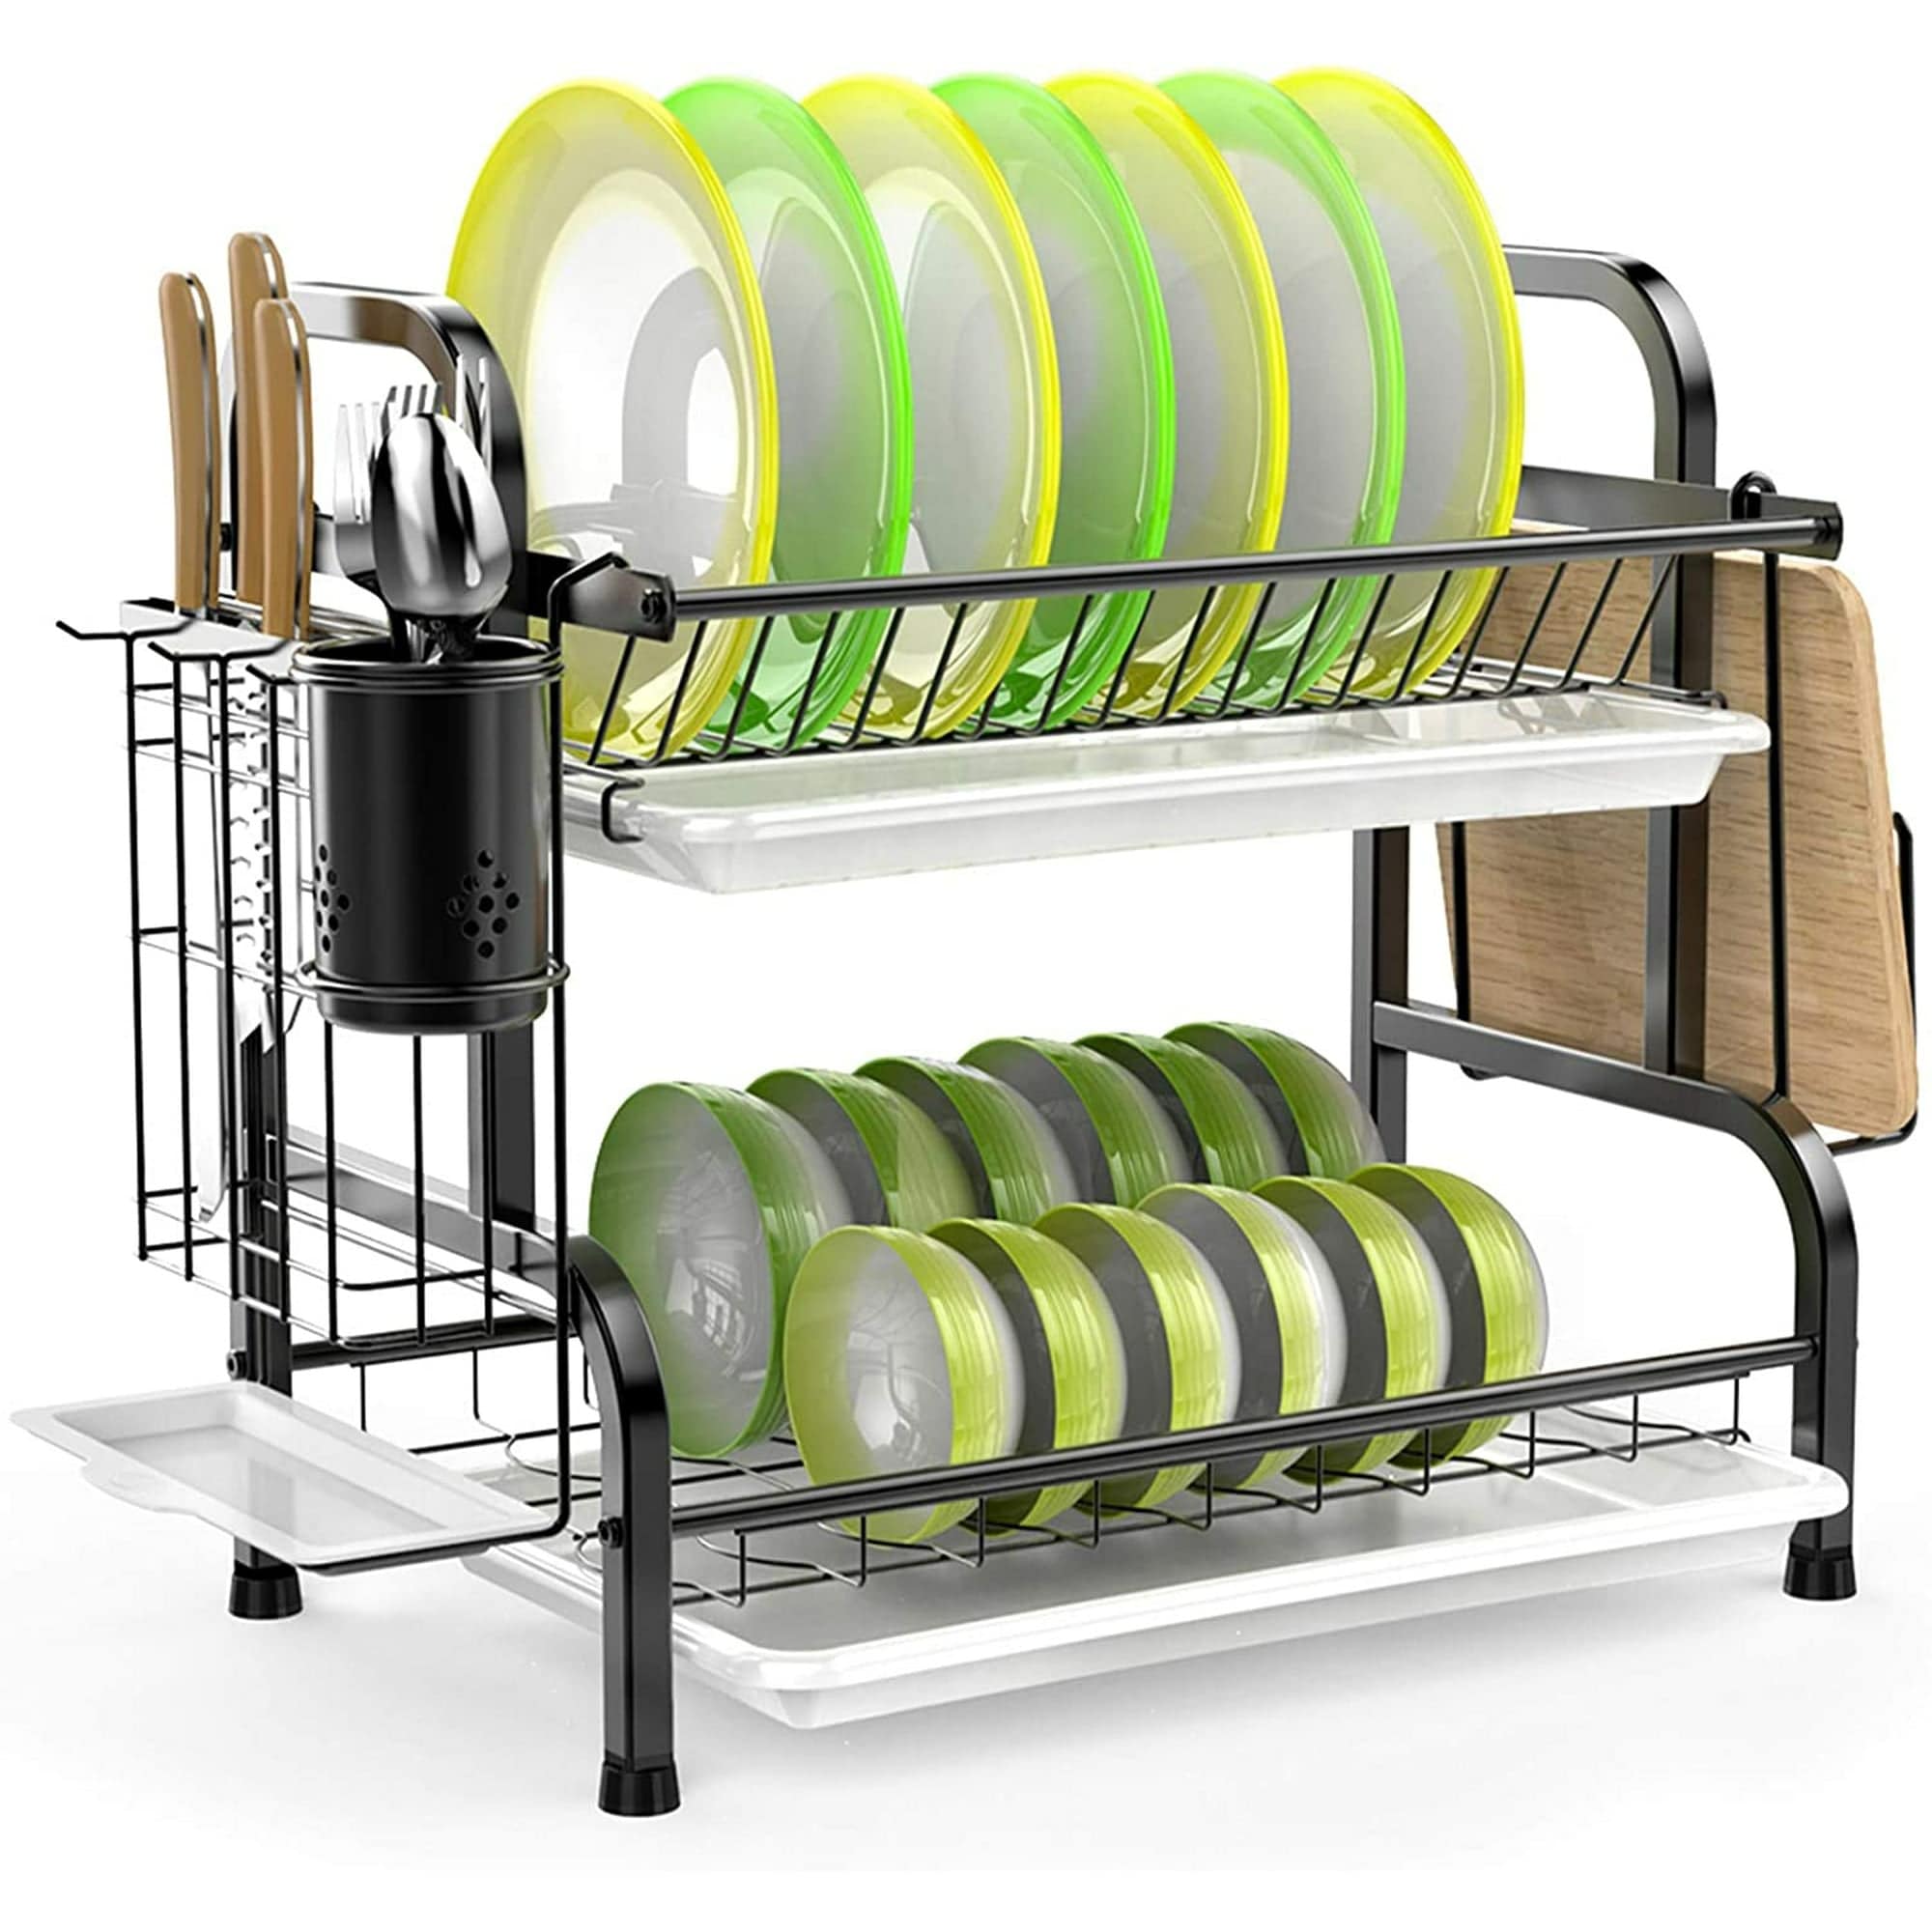 https://ak1.ostkcdn.com/images/products/is/images/direct/dd702dd64e112fce949db544b960ae8c53e460c4/2-Tier-304-Stainless-Steel-Dish-Drying-Rack-for-Kitchen-Counter.jpg